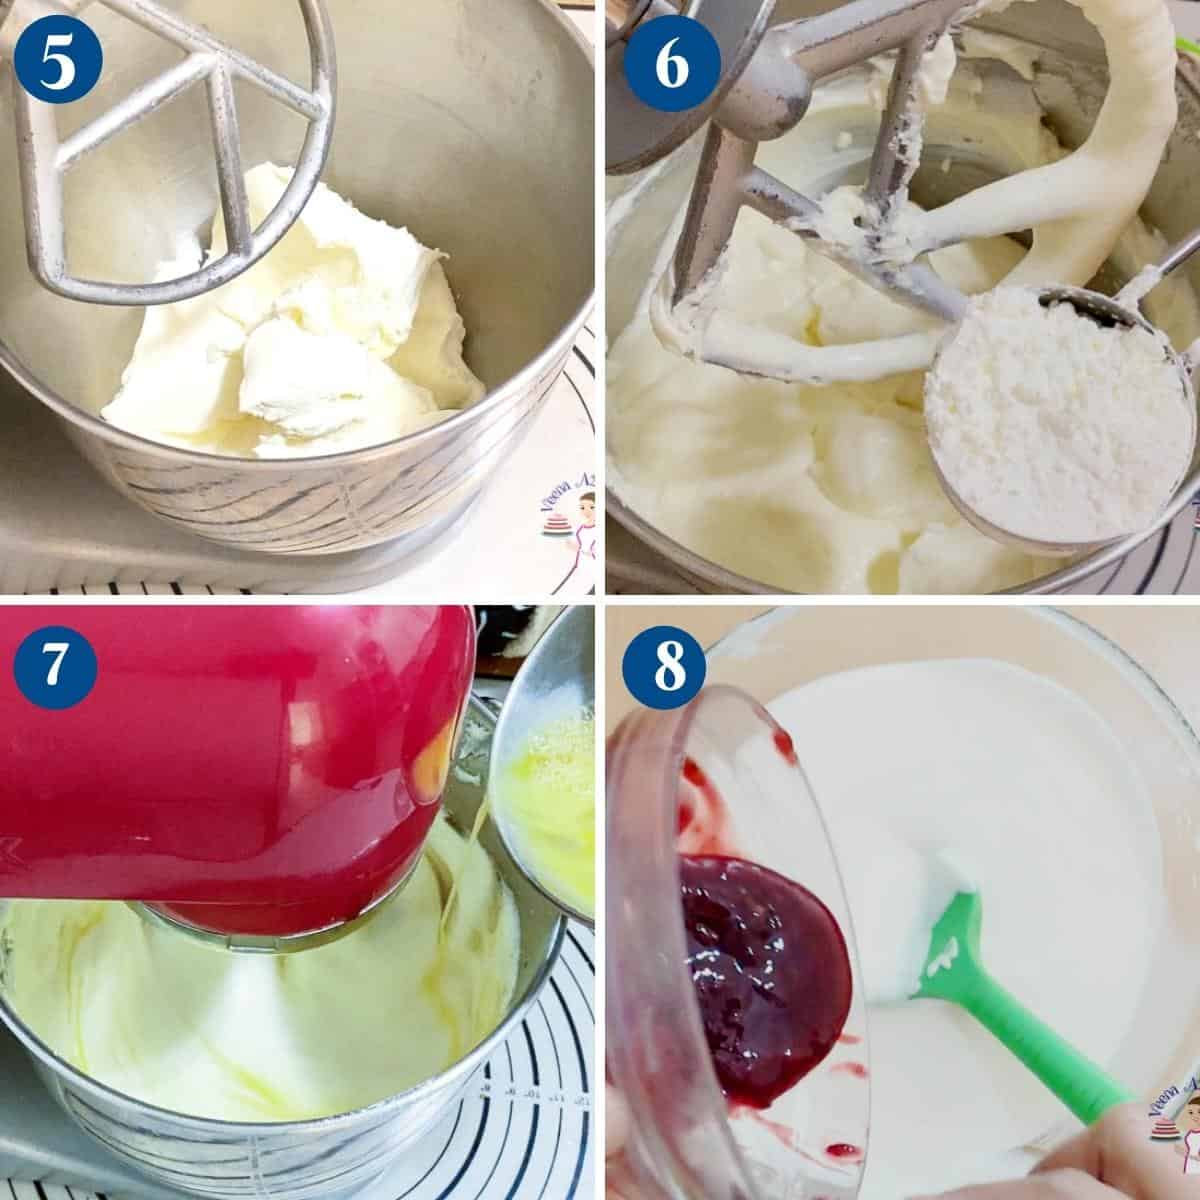 Progress pictures for mini cheesecake batter.